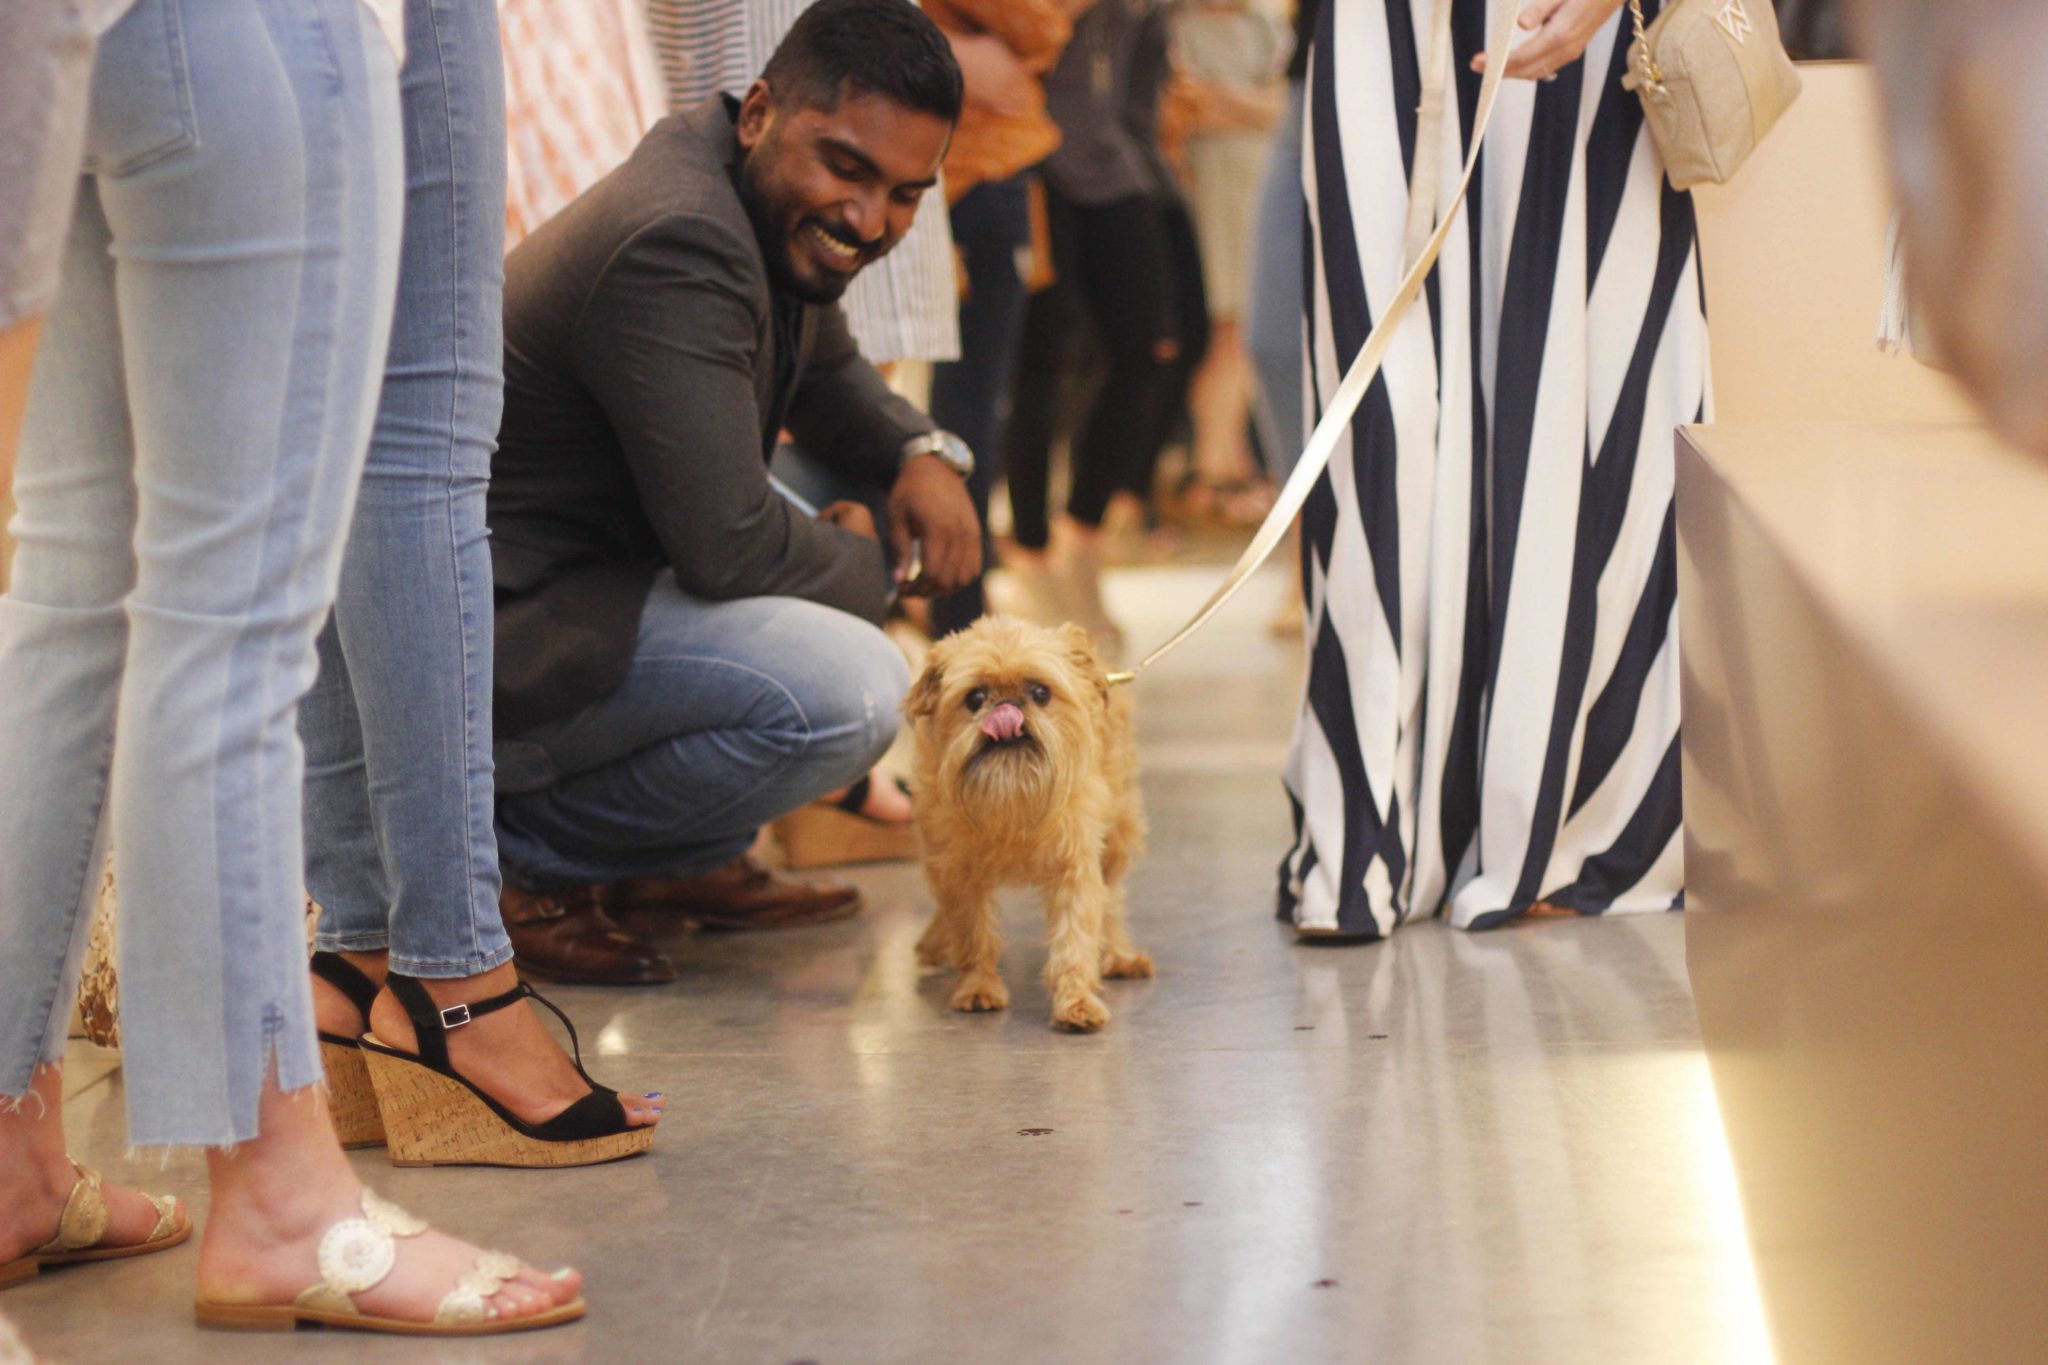 Event recap from the PAWsh Puppy Fashion Show with Kelly Wynne Handbags. Steven Jalapeño and 5 other dogs participated in the Austin Pets Alive runway way show. Click for more info and pictures.